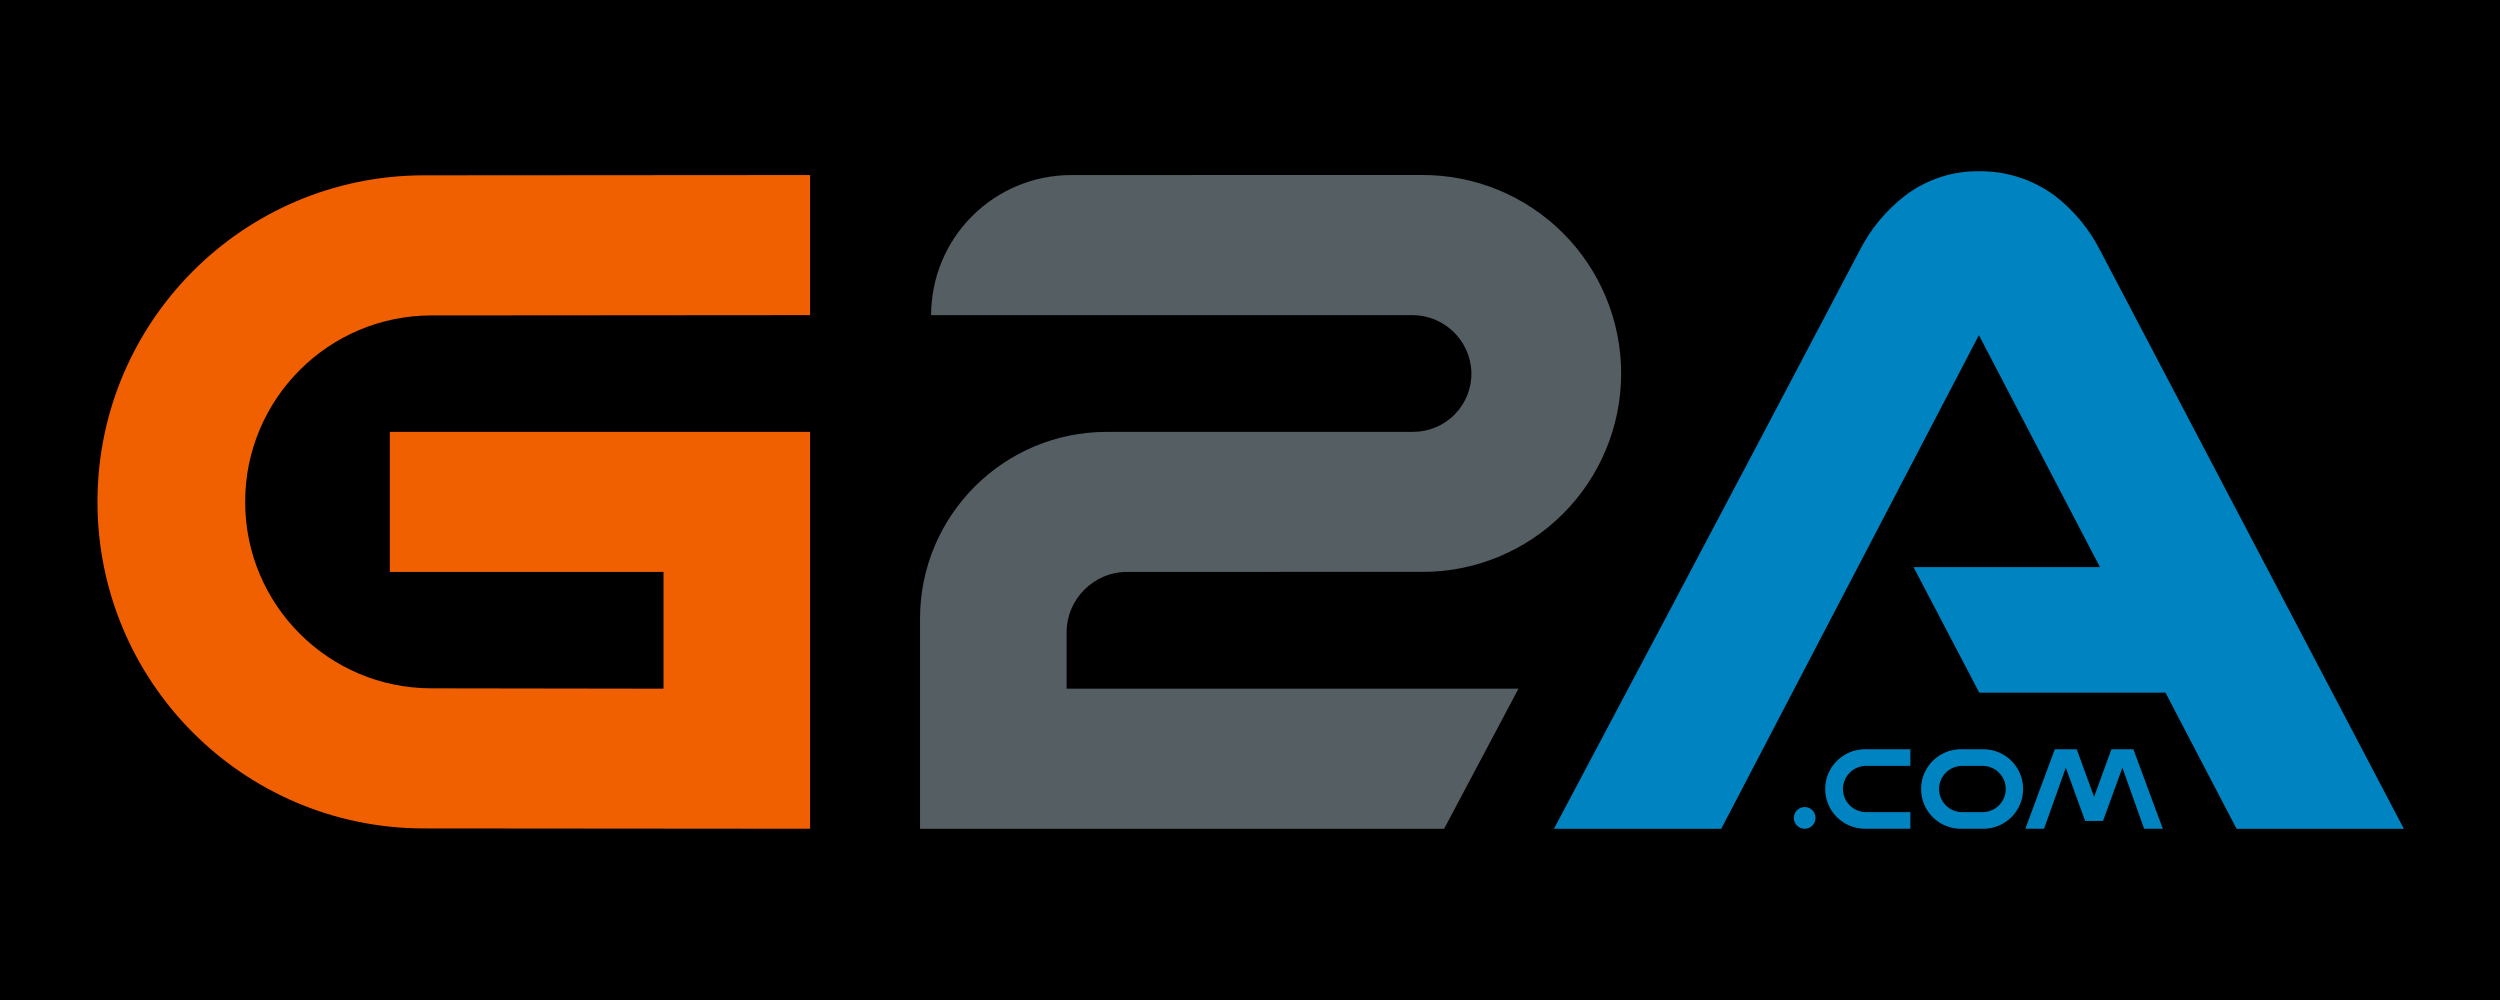 G2A Coupons & Promo Codes